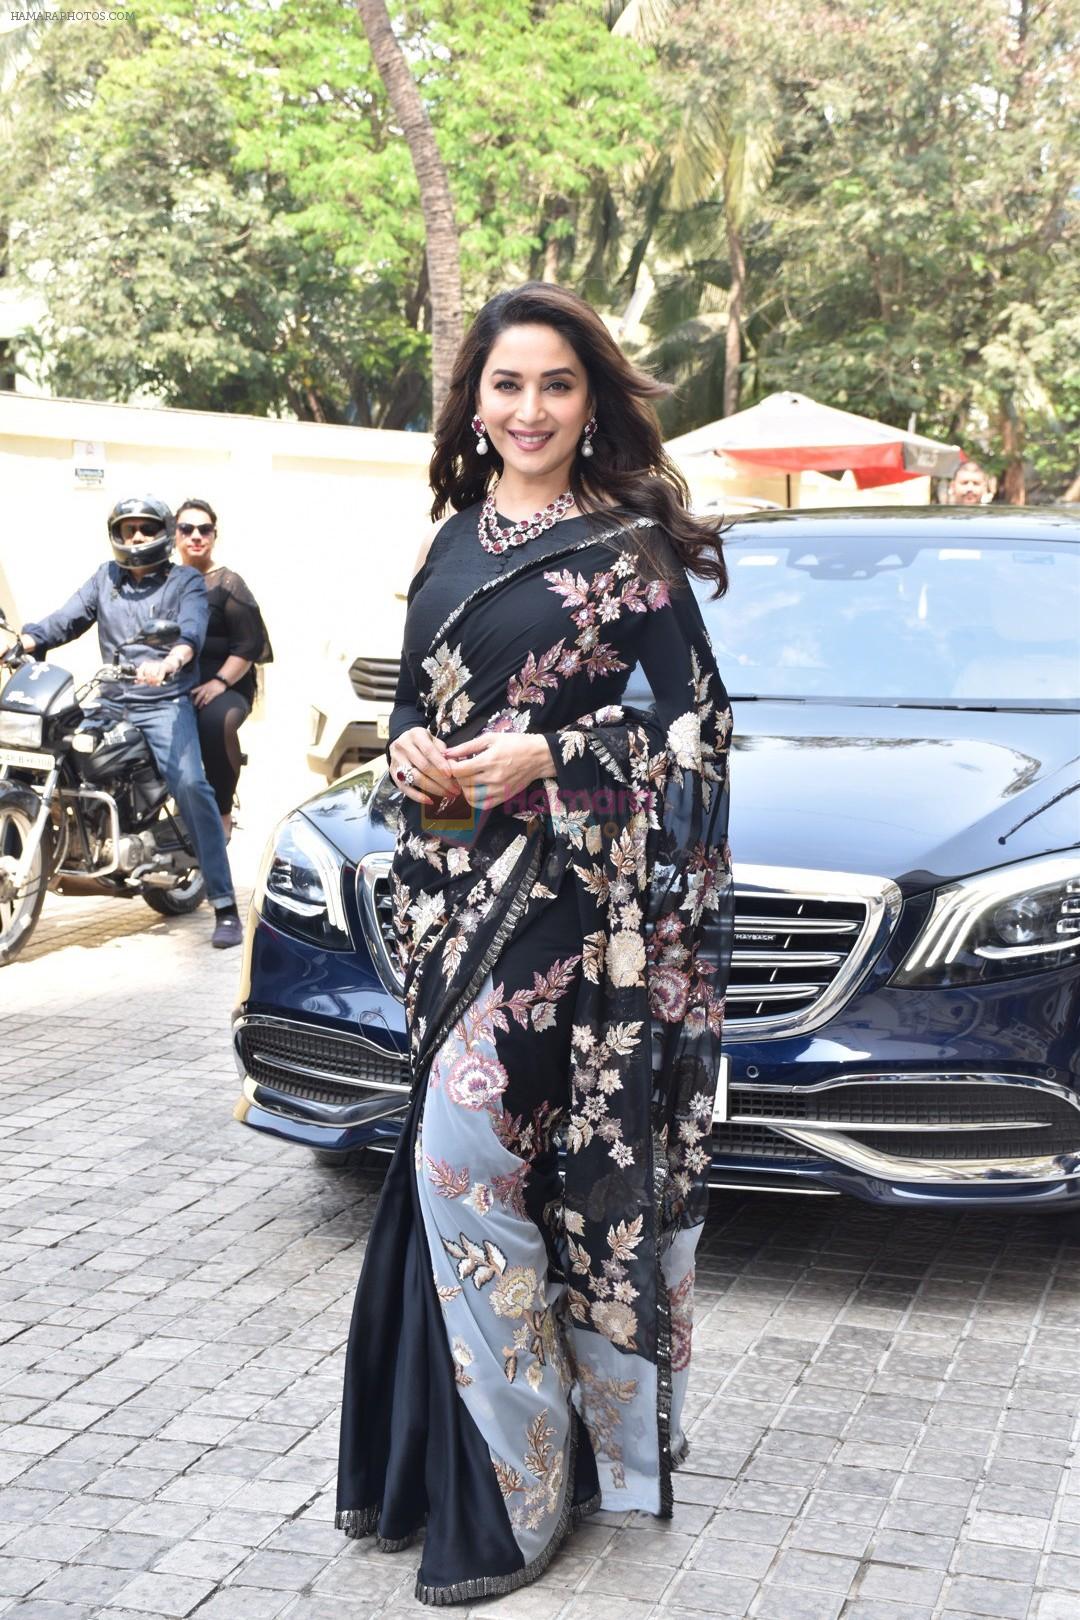 Madhuri Dixit at the Teaser launch of KALANK on 11th March 2019